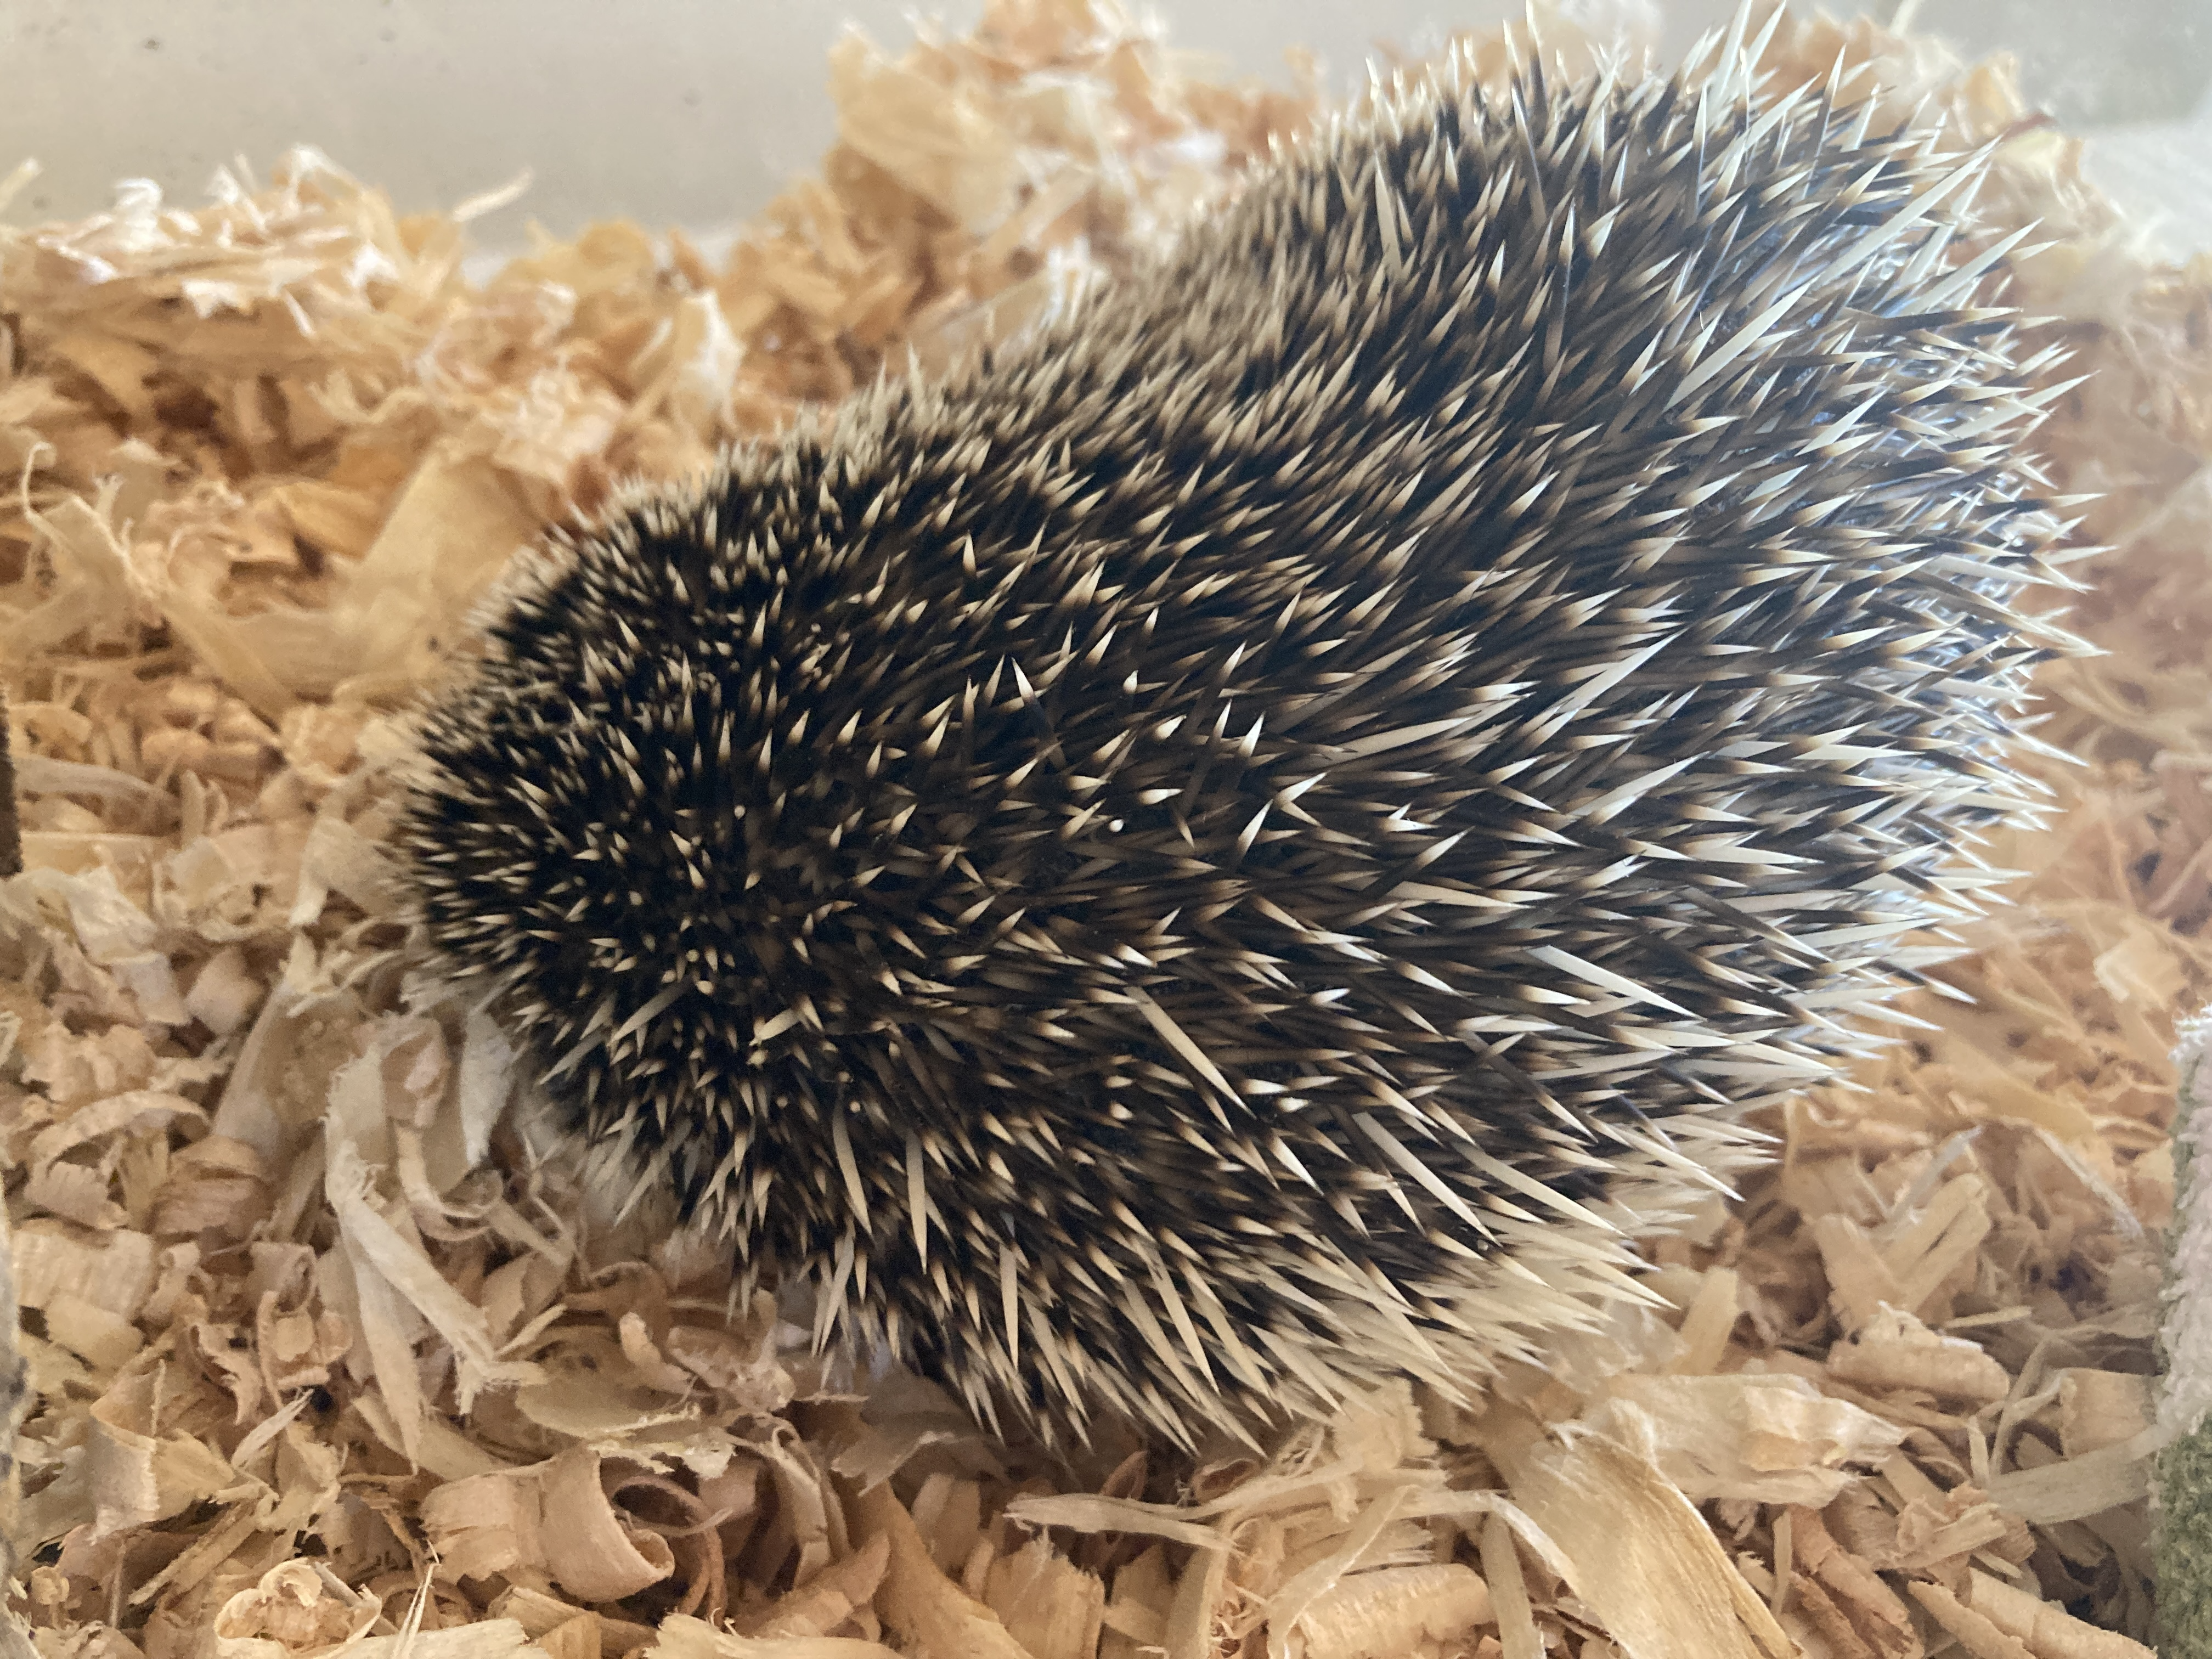 Olive in her spiky ball form